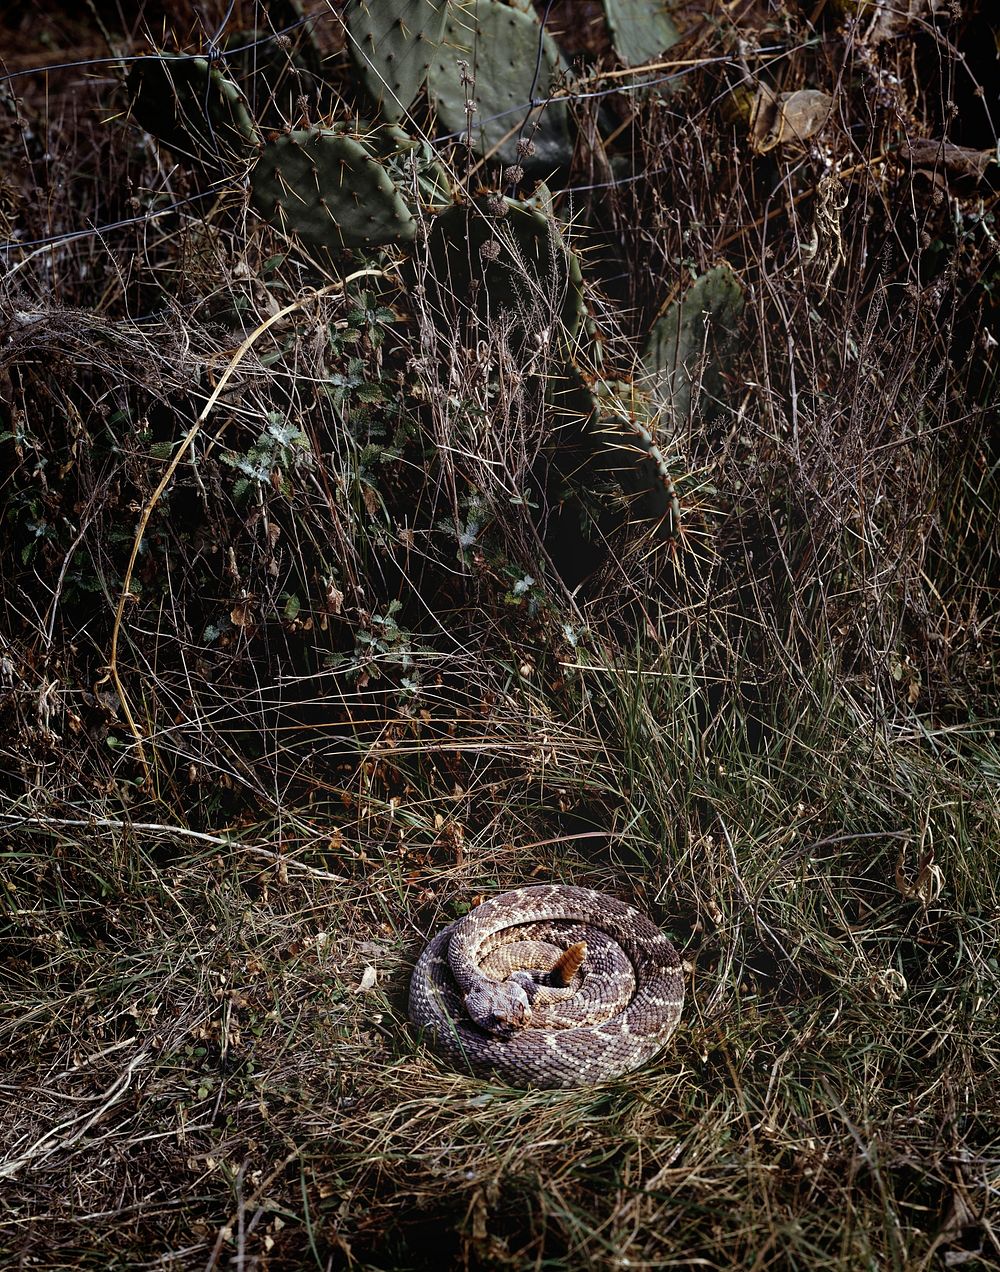 Coiled rattlesnake in brush outside San Marcos, Texas. Original image from Carol M. Highsmith&rsquo;s America, Library of…